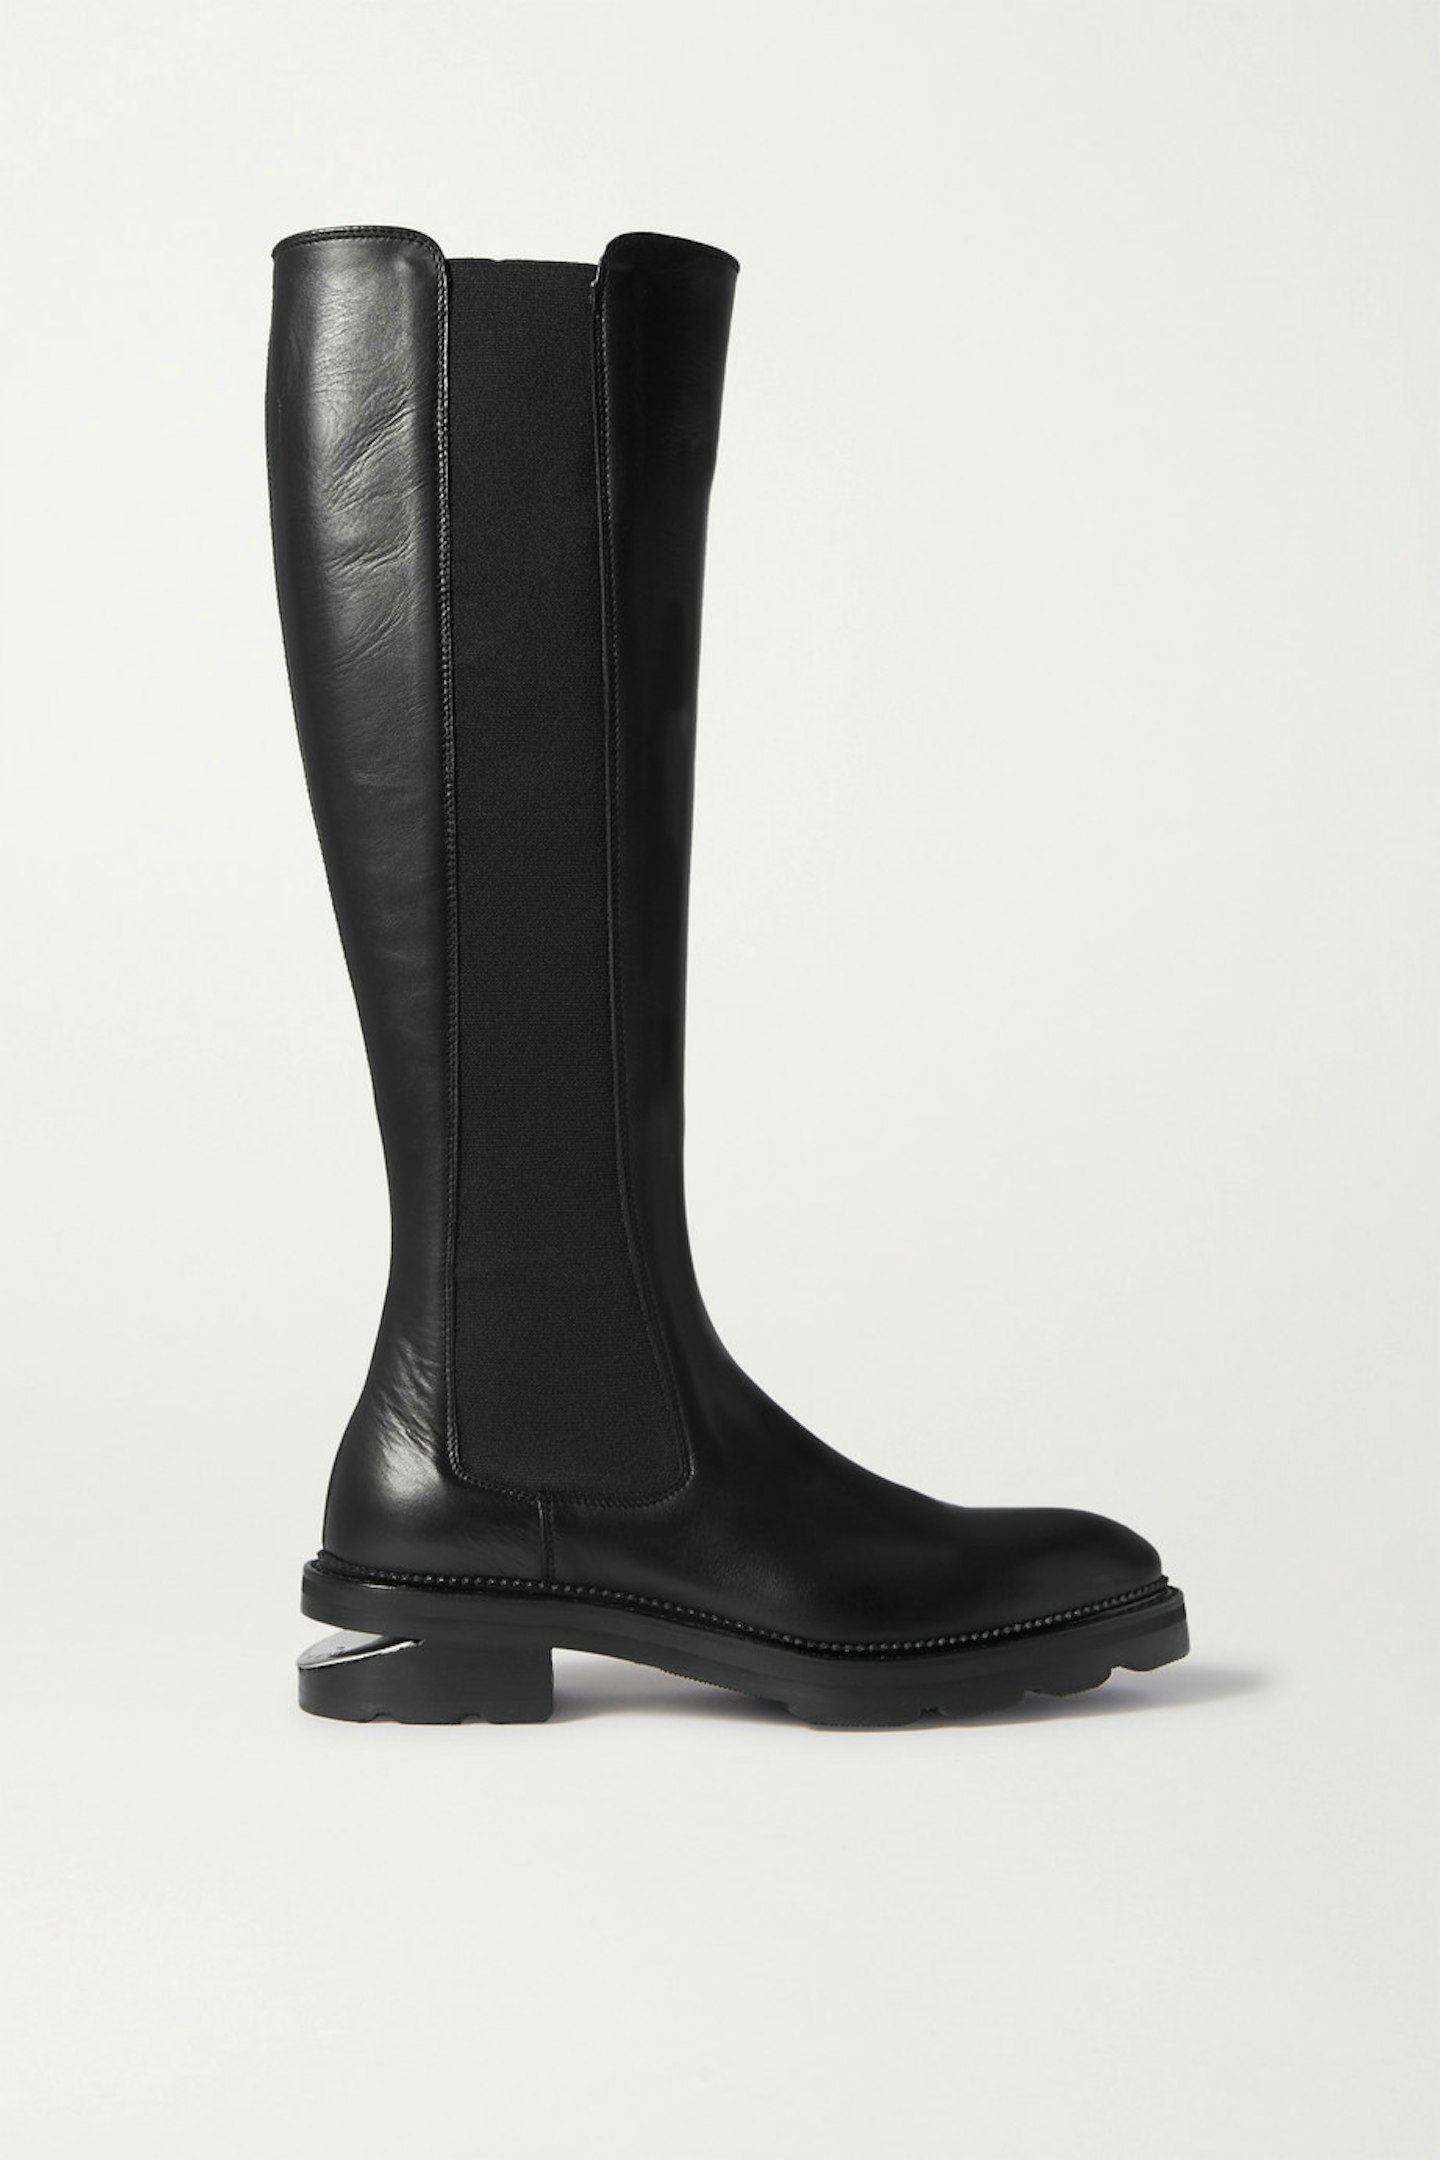 Alexander Wang, Andy Leather Knee Boots, £855